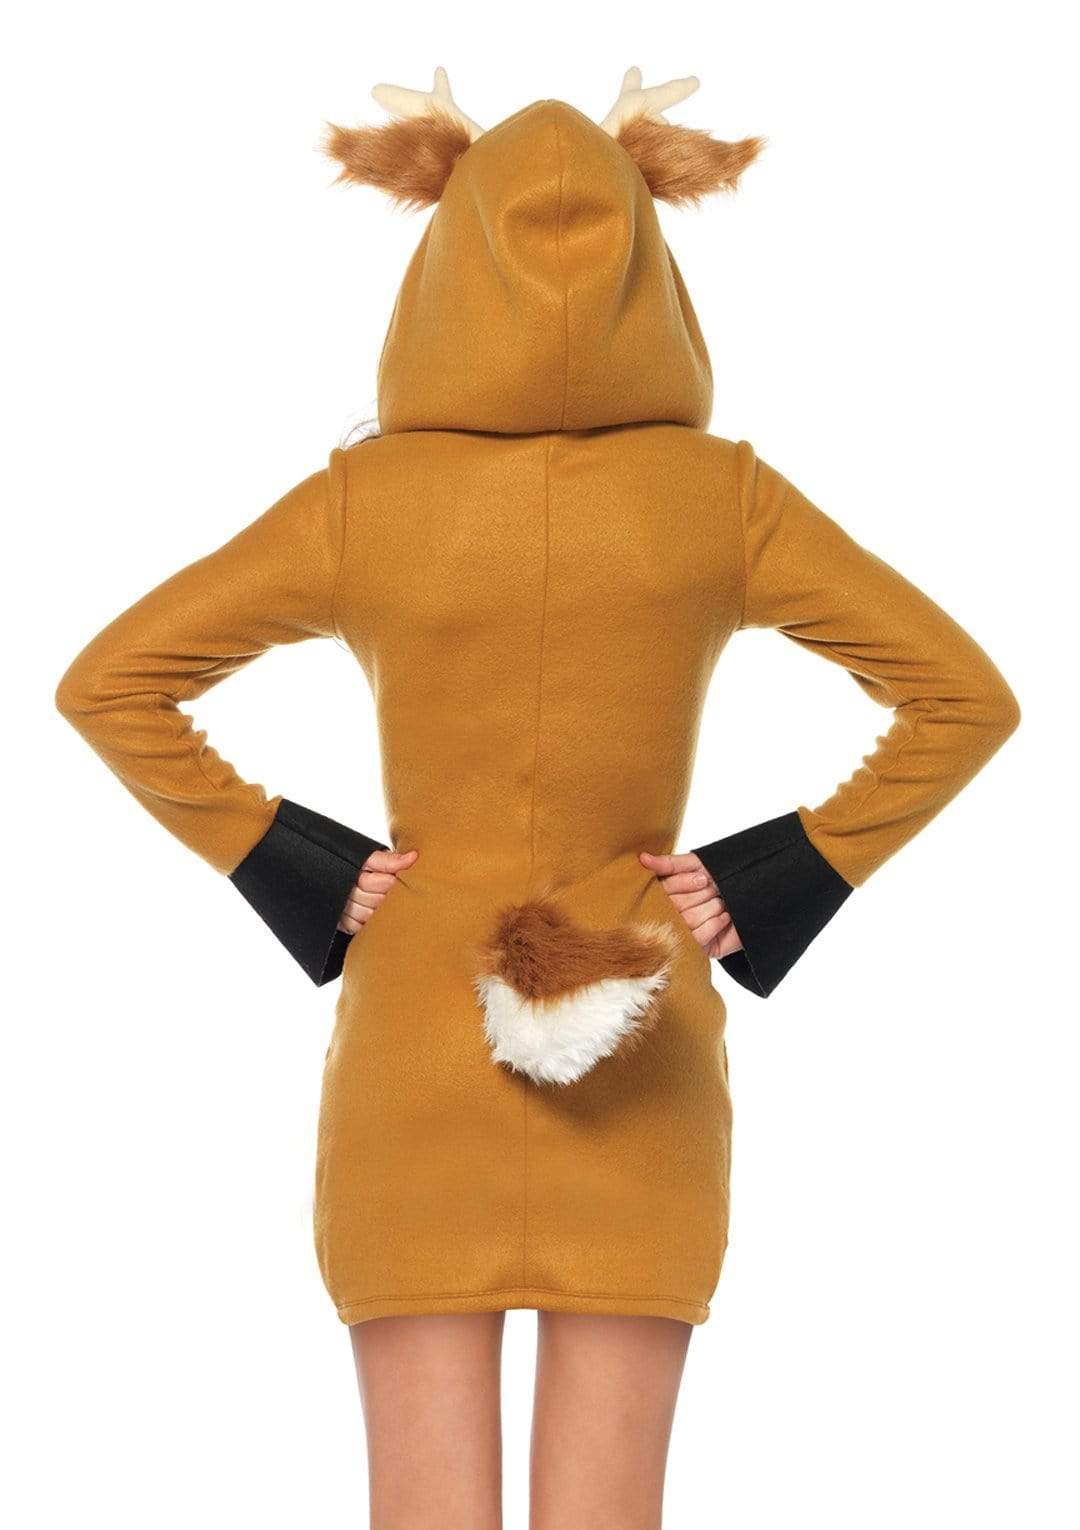 Fawn Fleece Zipper Front Dress with Ear Hood and Fawn Tail